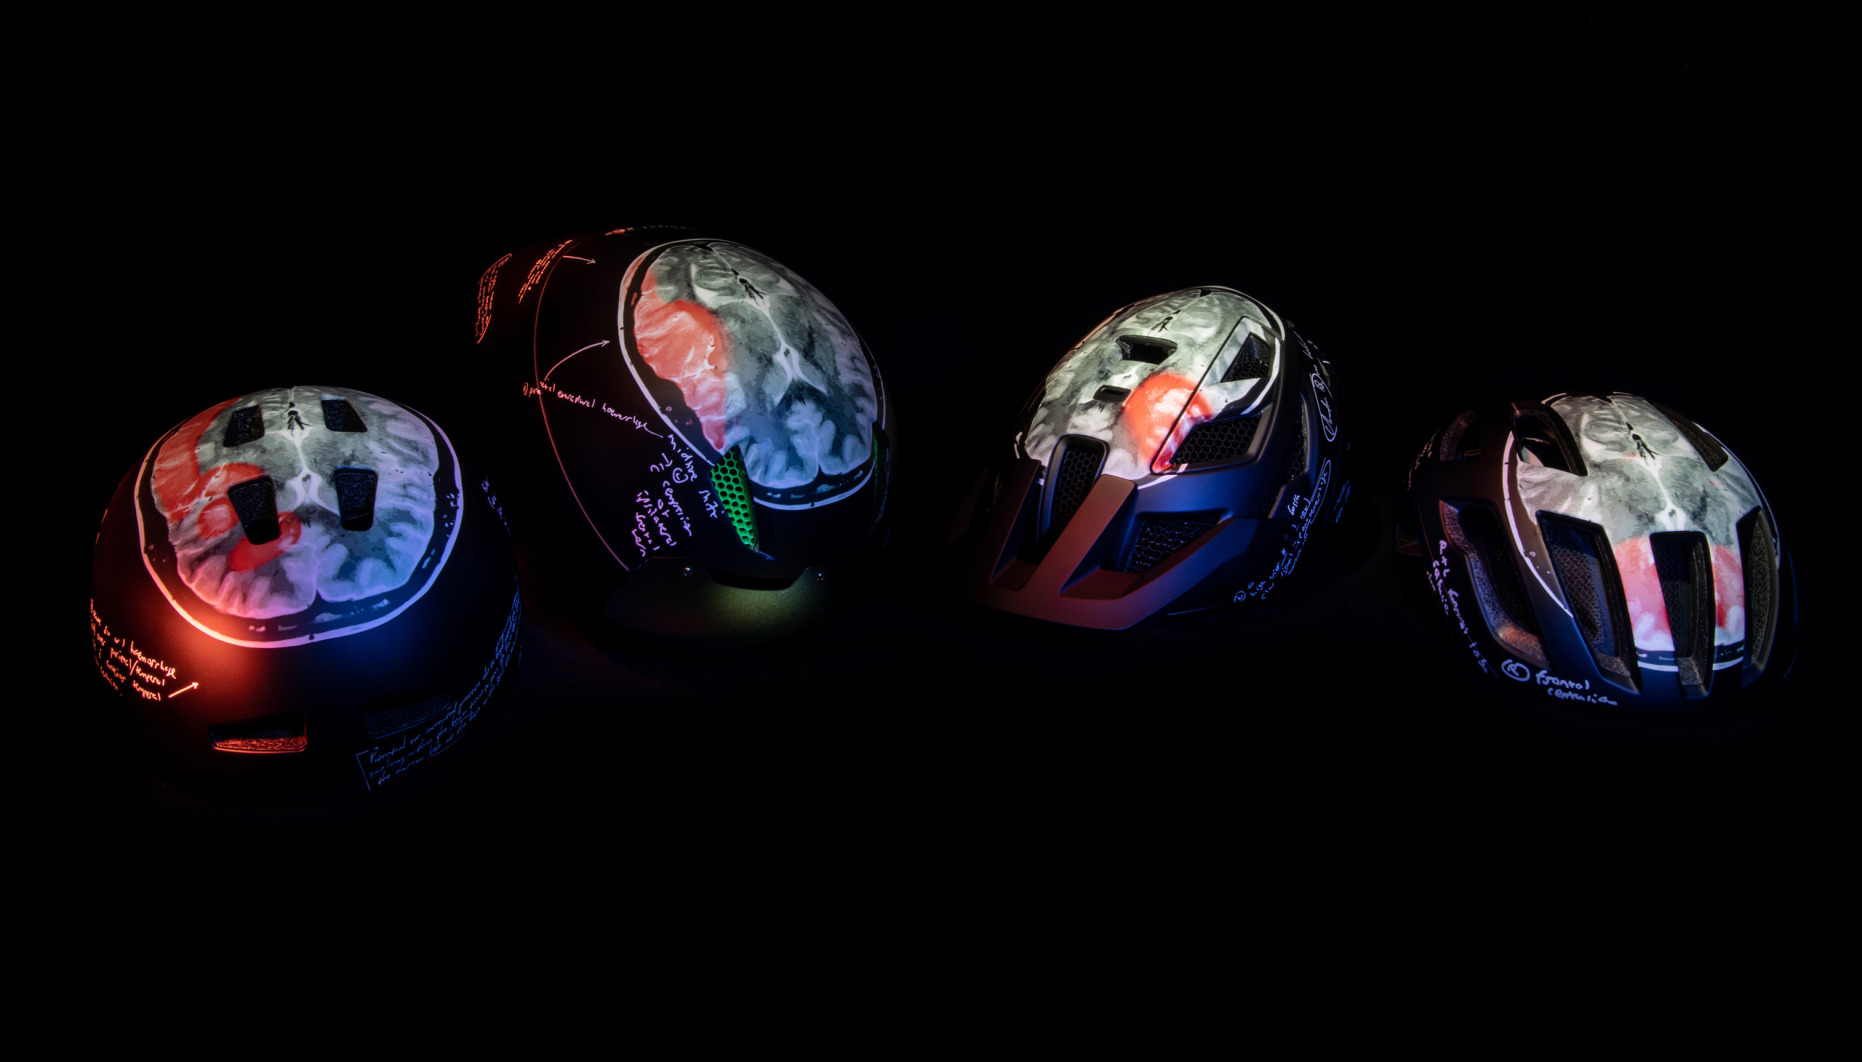 The four Endura Project Heid CAT-scan cycling helmets